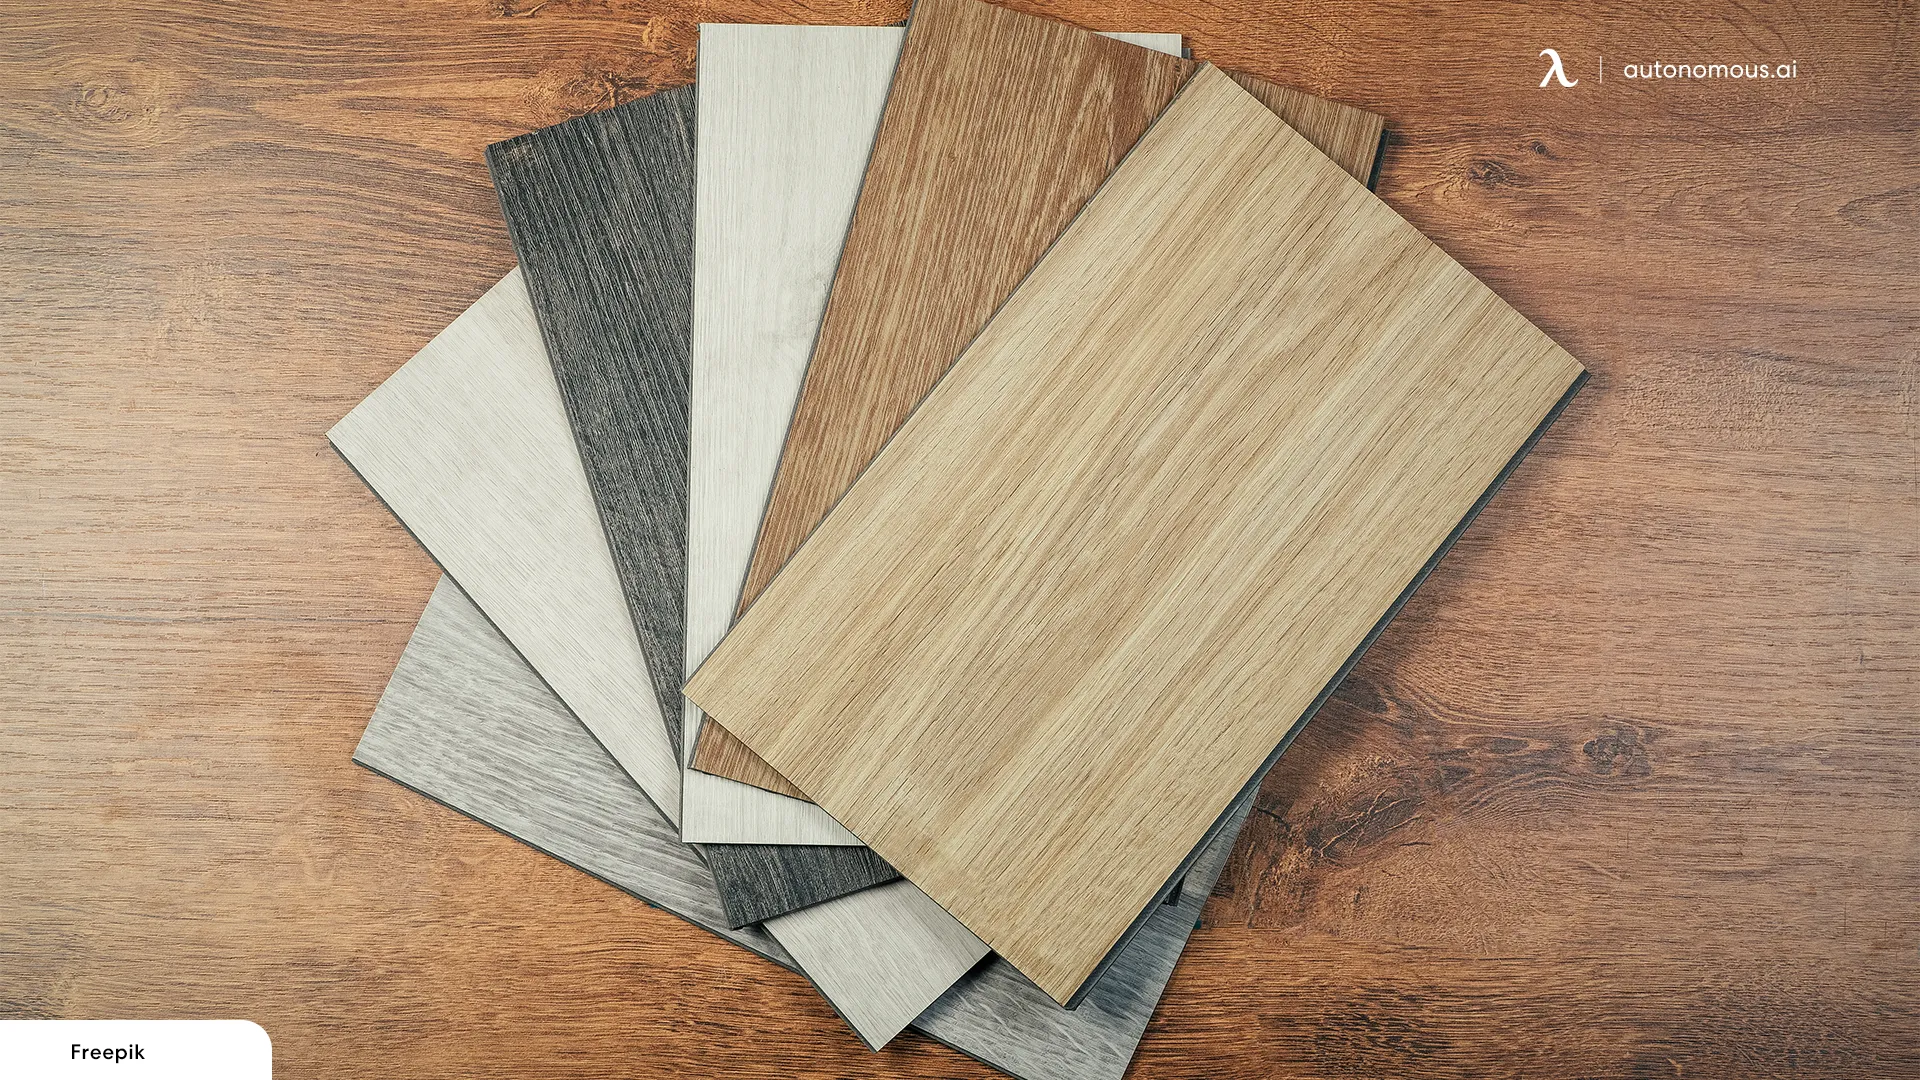 Laminate - What Is It?